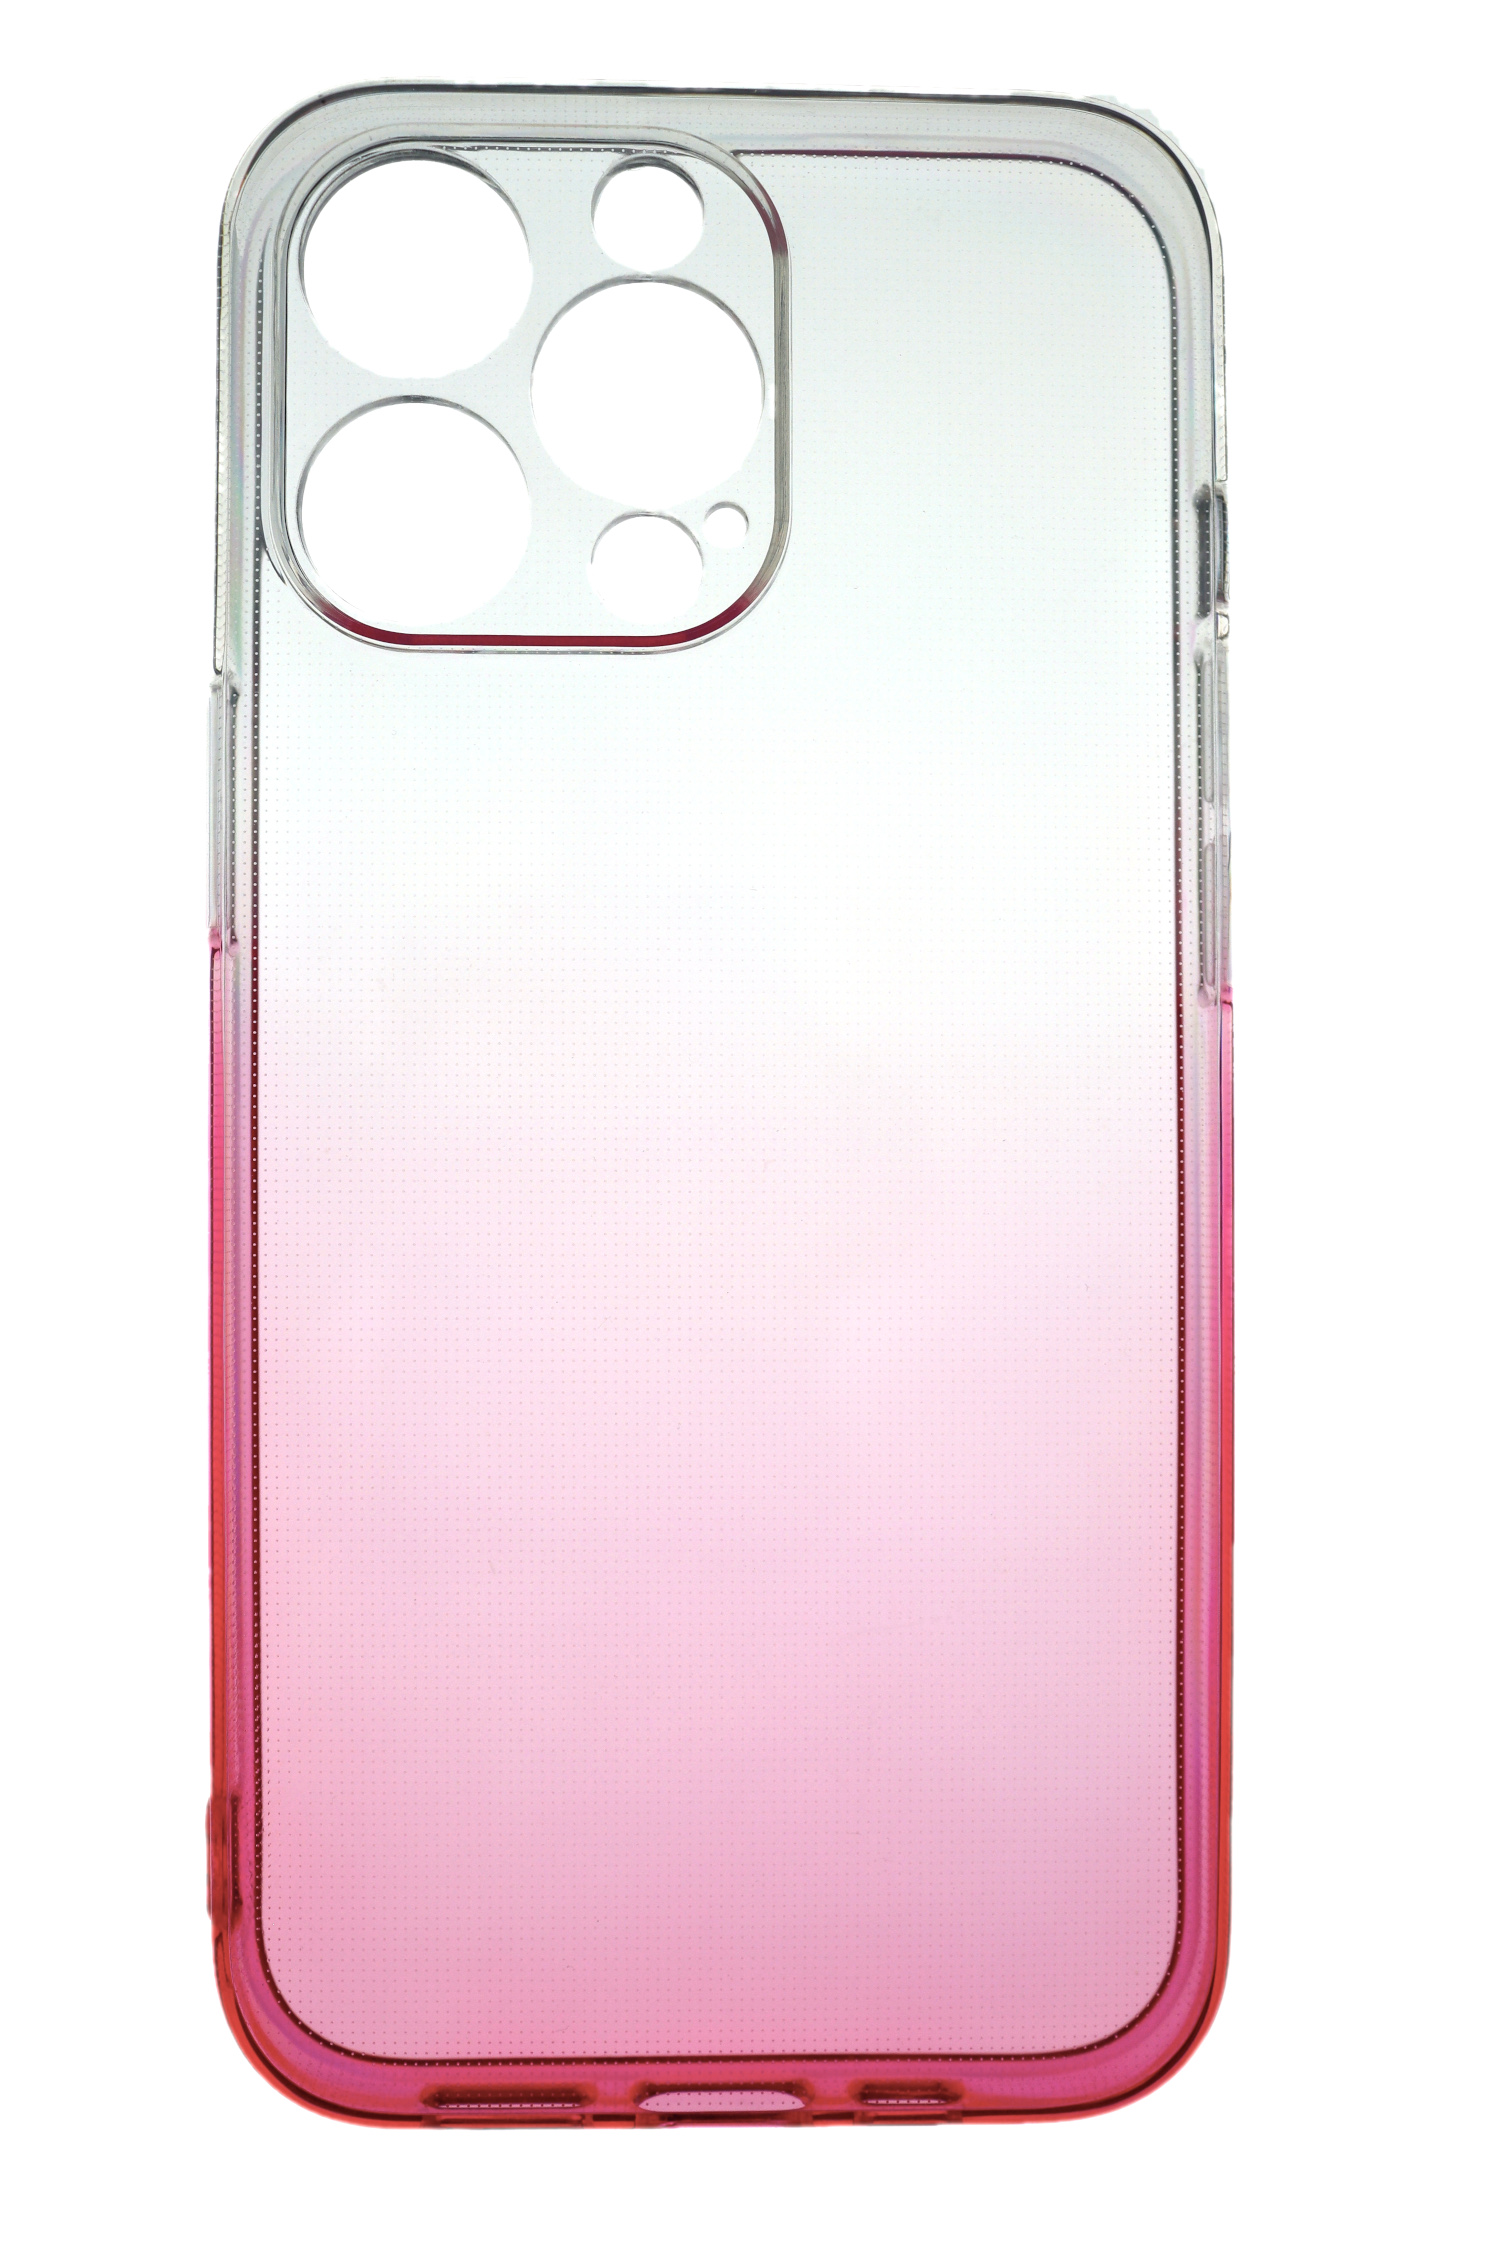 2.0 Apple, Pro mm Max, TPU Backcover, Case JAMCOVER Pink, Strong, iPhone Transparent 13